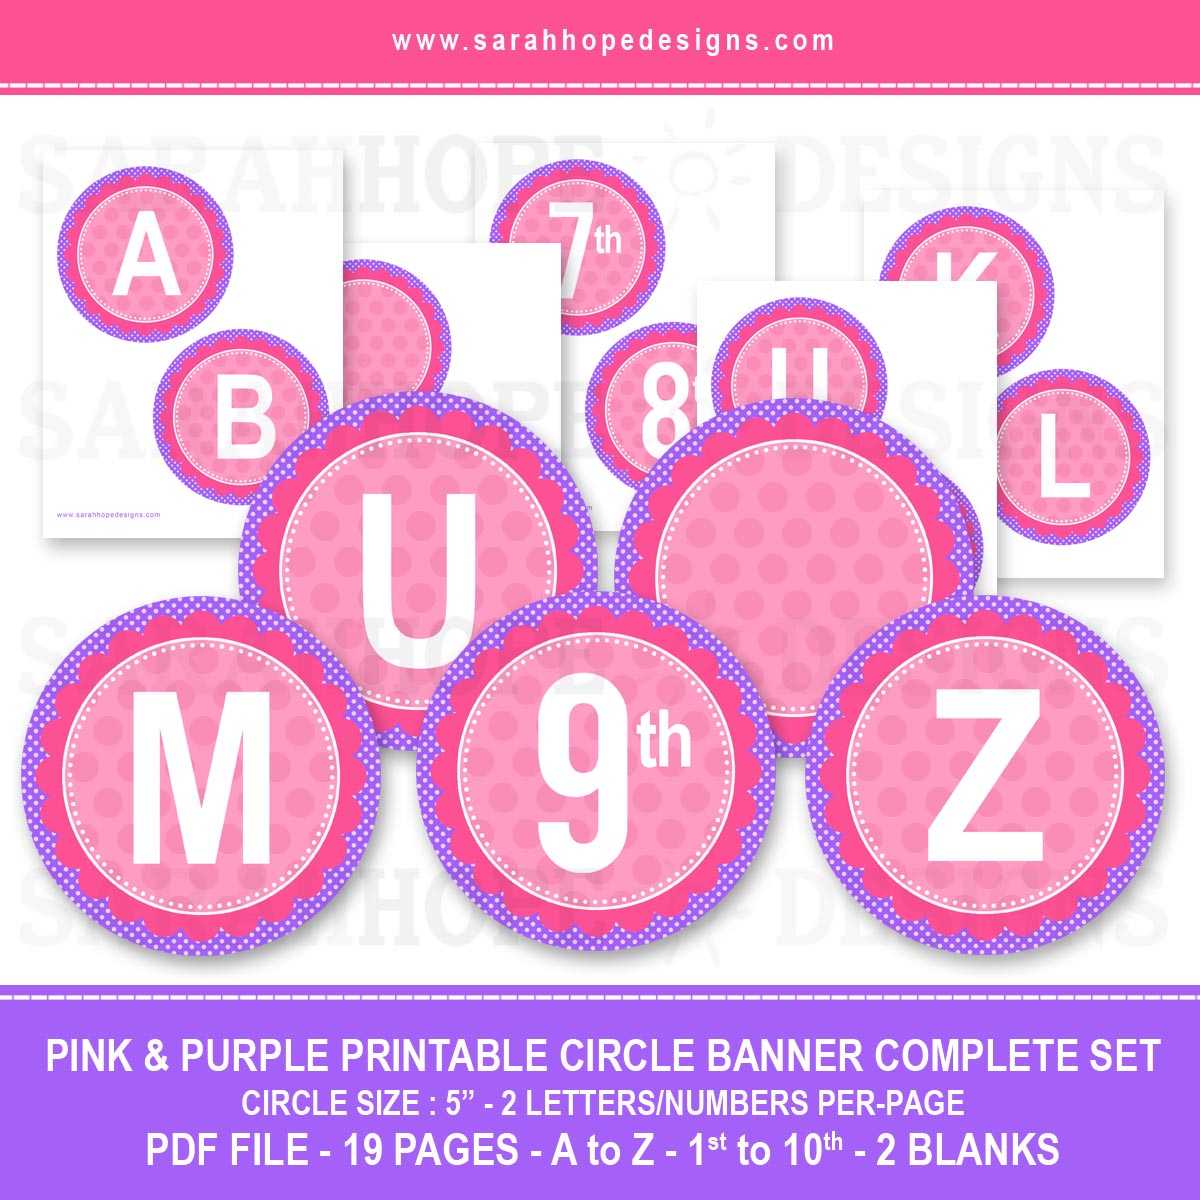 Spell Out Anything With These Free Alphabet Circle Banners Intended For Free Letter Templates For Banners